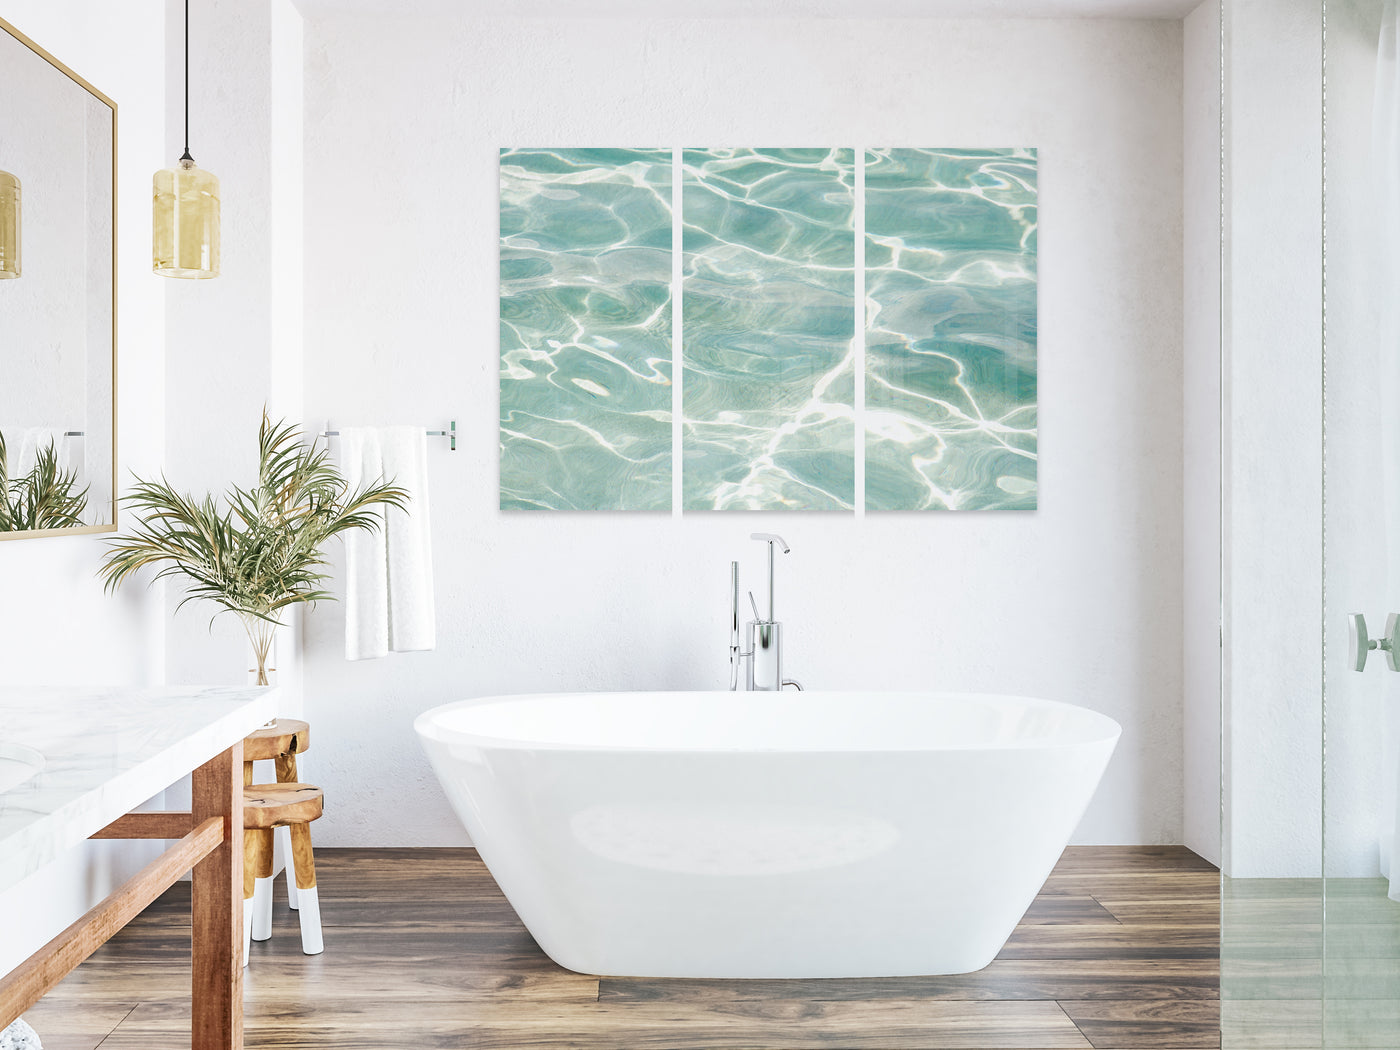 Caribbean Sea No 3 - Large triptych acrylic glass wall art by Cattie Coyle Photography in bathroom